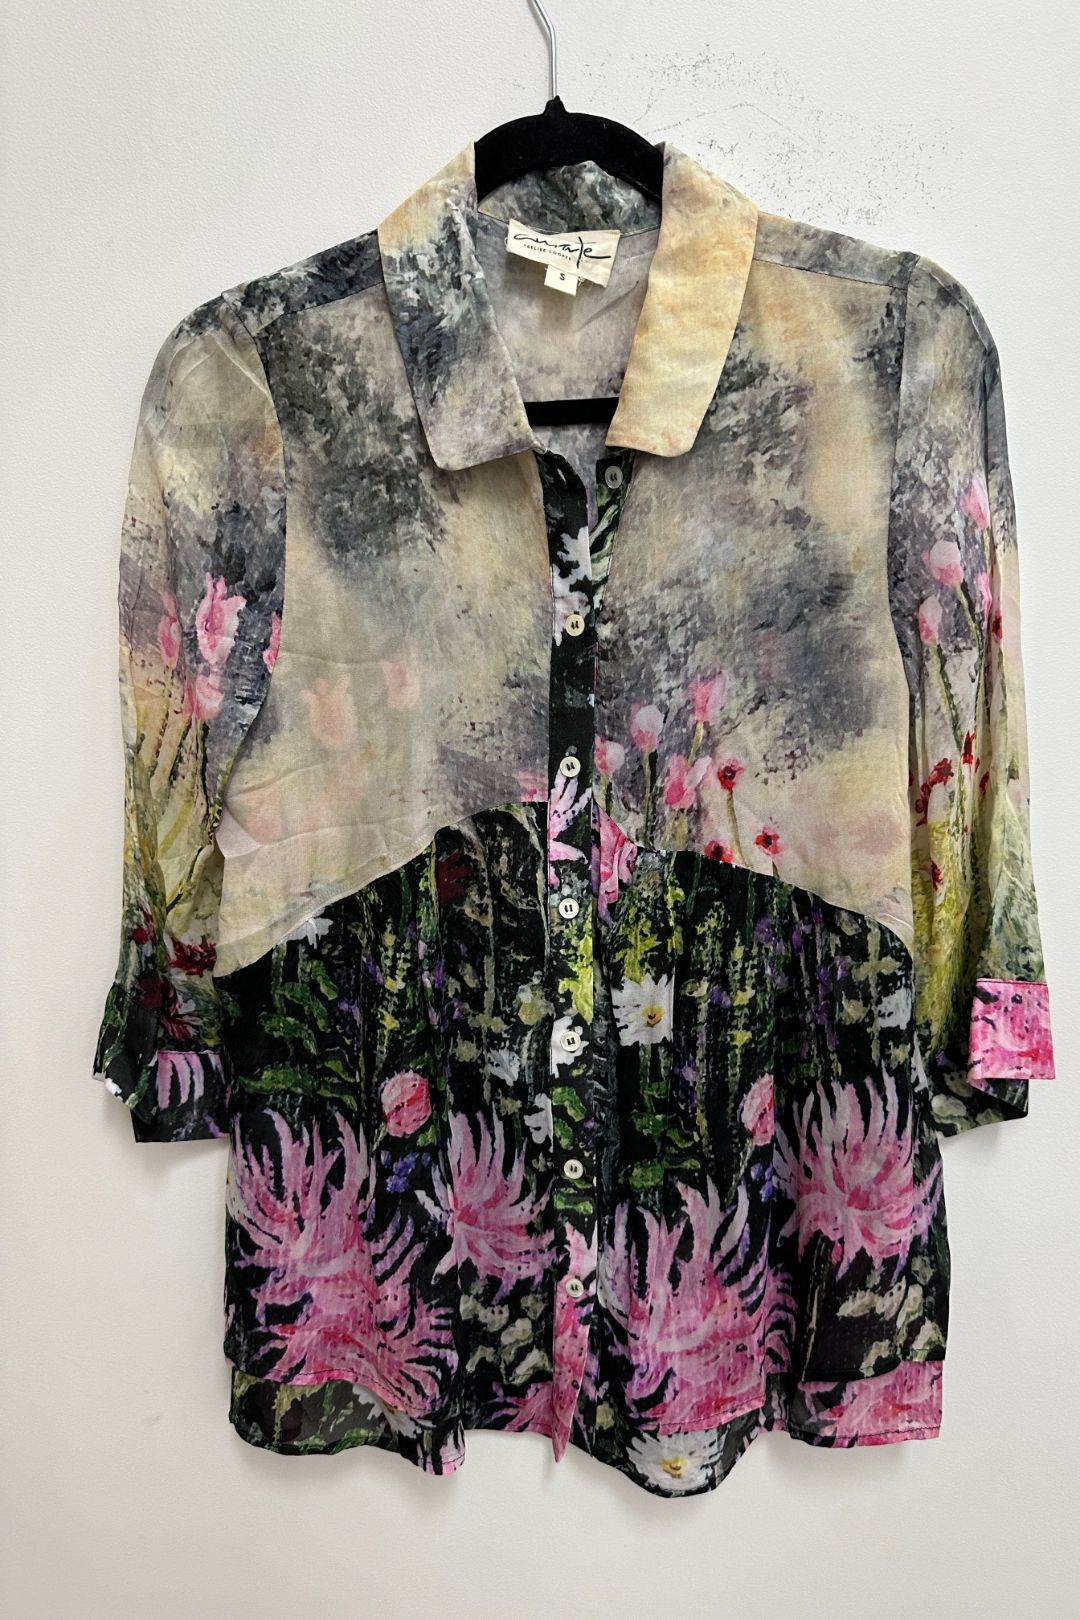 Curate By Trelise Cooper - The Shape Of New Devine Dreams Shirt in Floral Print